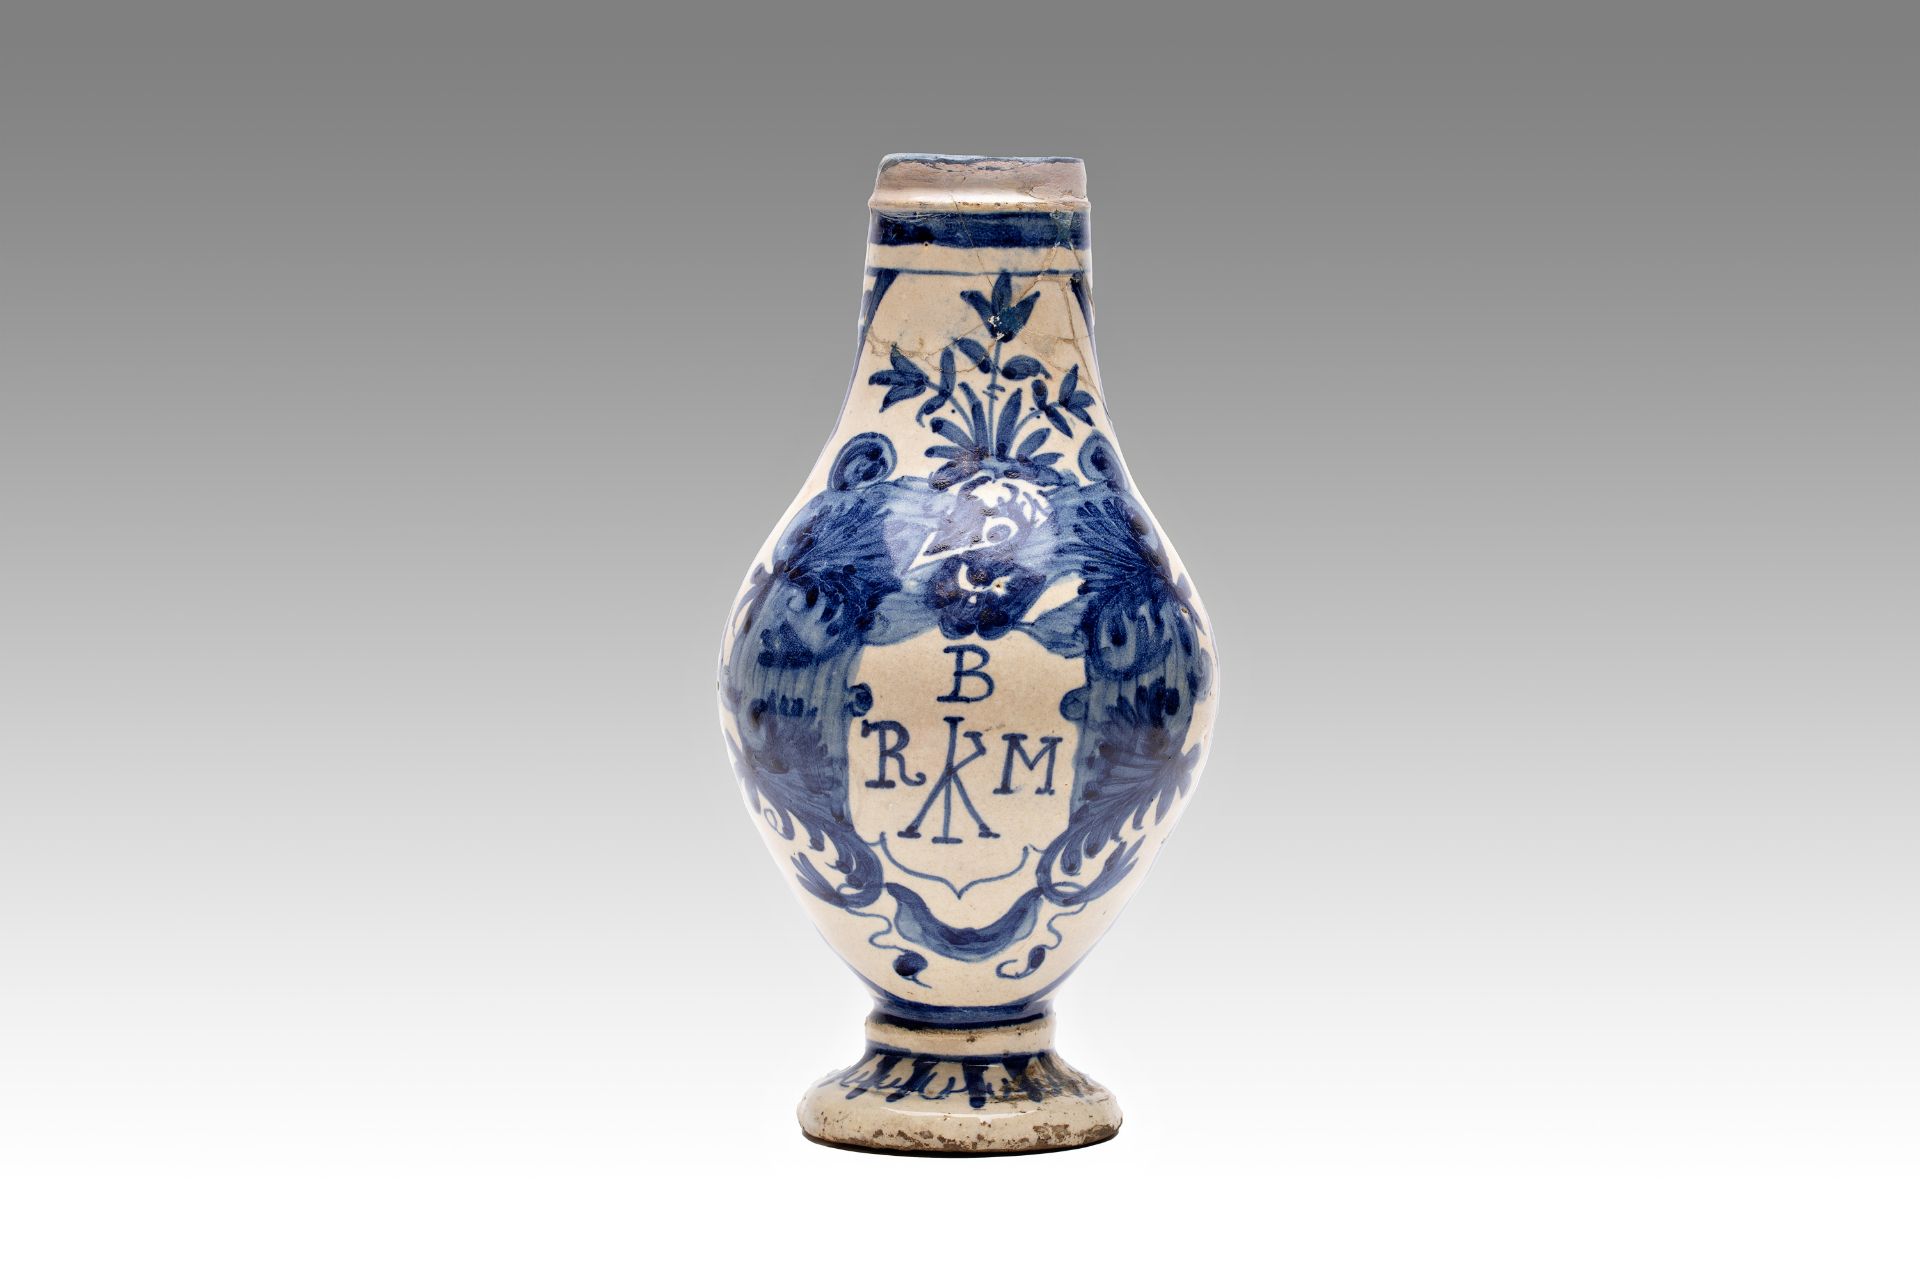 JUG WITH HERALDIC EMBLEM | South Europe (South Europe / South European - 18th century)